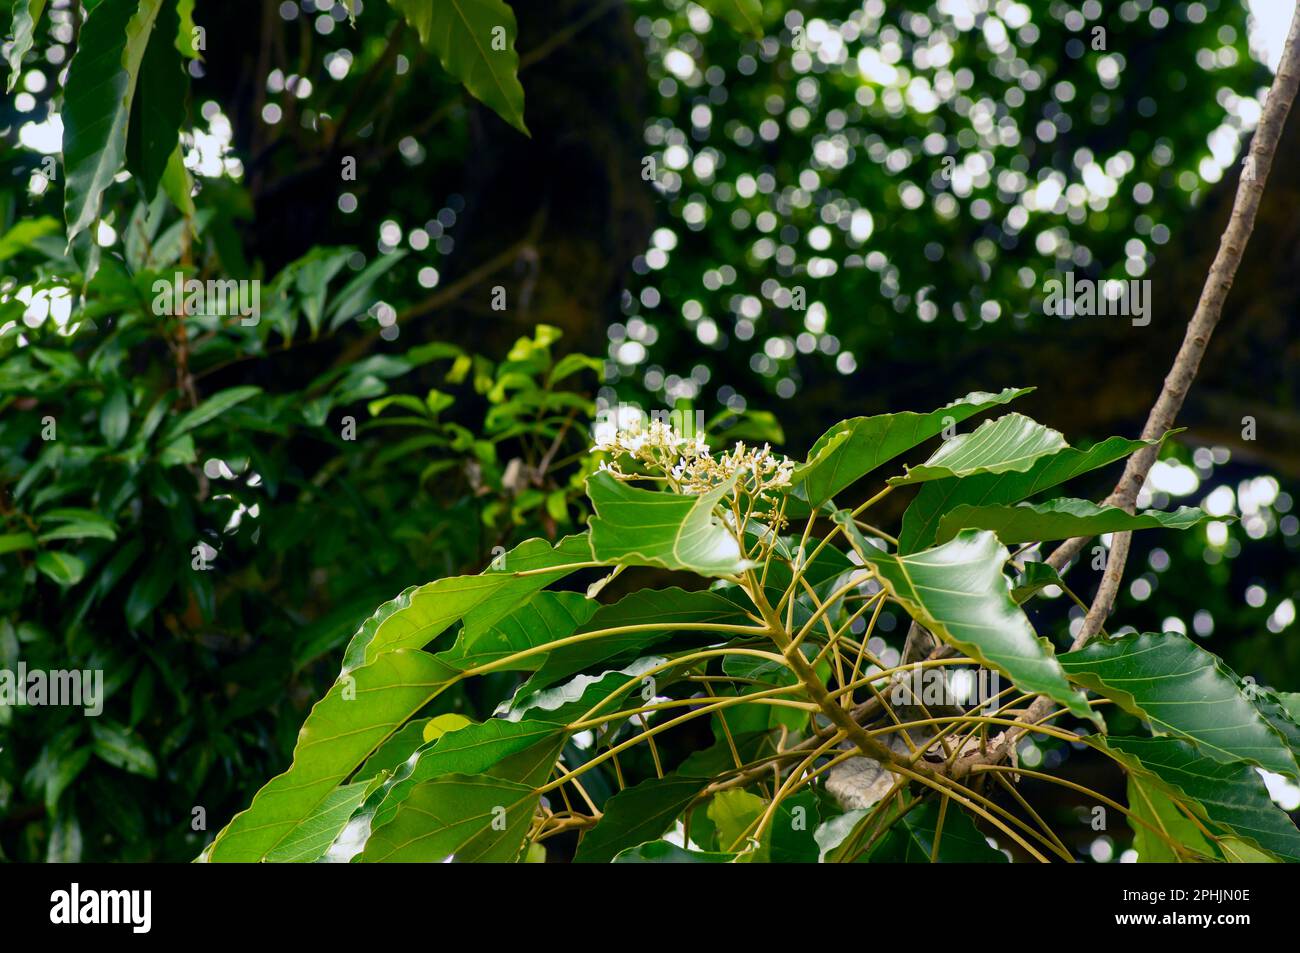 Close up of Candlenut tree (Aleurites moluccana) flowers and green leaves Stock Photo